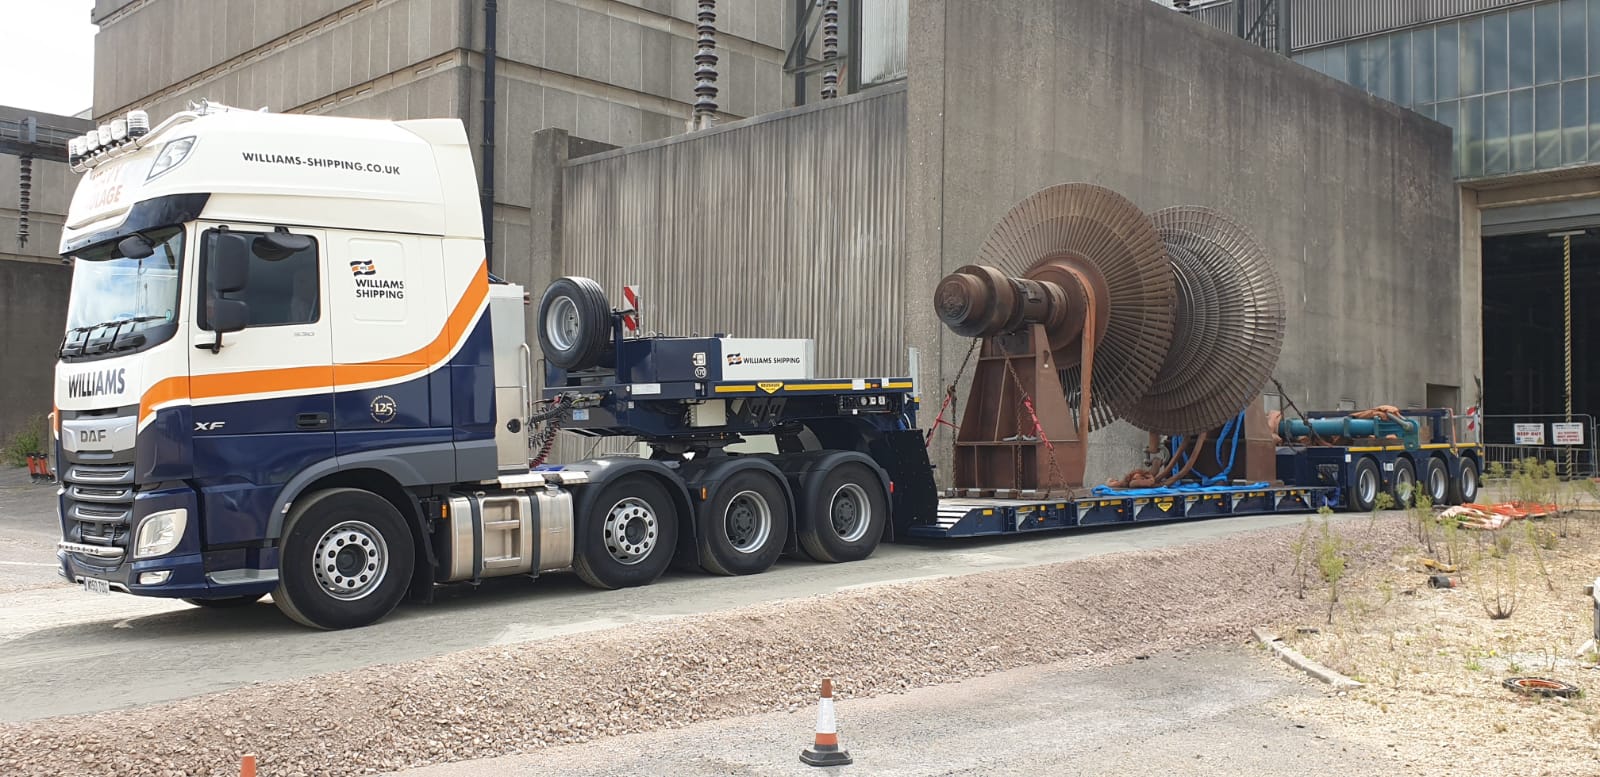 Large mechanical equipment on the trailer of a heavy haul truck